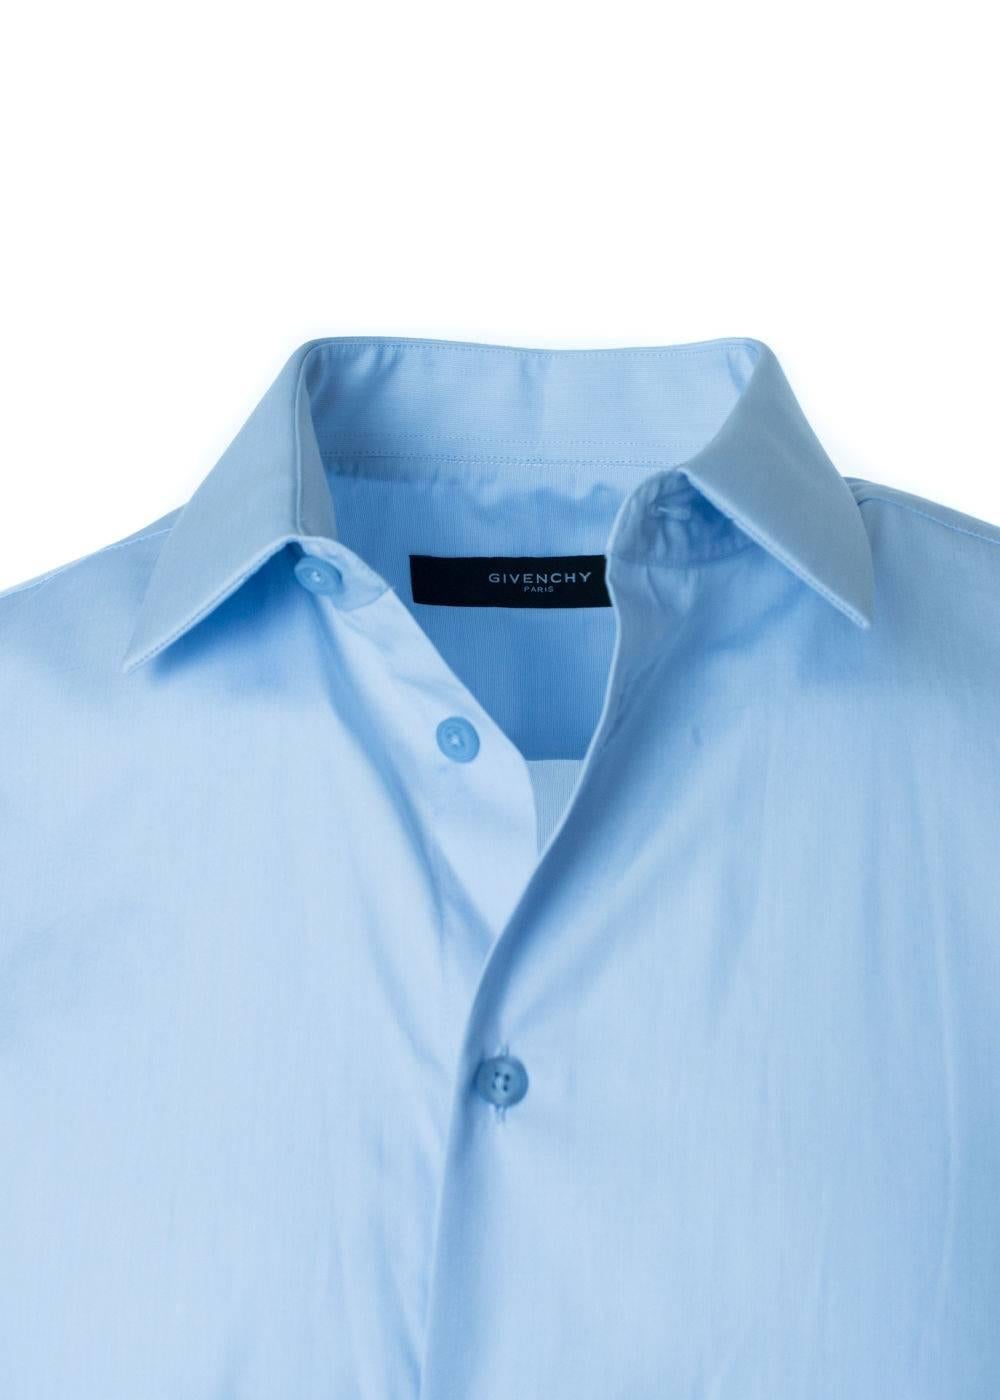 Brand New Givenchy Men's Button Down
Original Tags
Retails in Stores & Online for $495
Men's Size E41 (XS) Fits True to Size

Classic blue denim button down from fashion house Givenchy with a twist in style. Pair it with your go to bottoms or